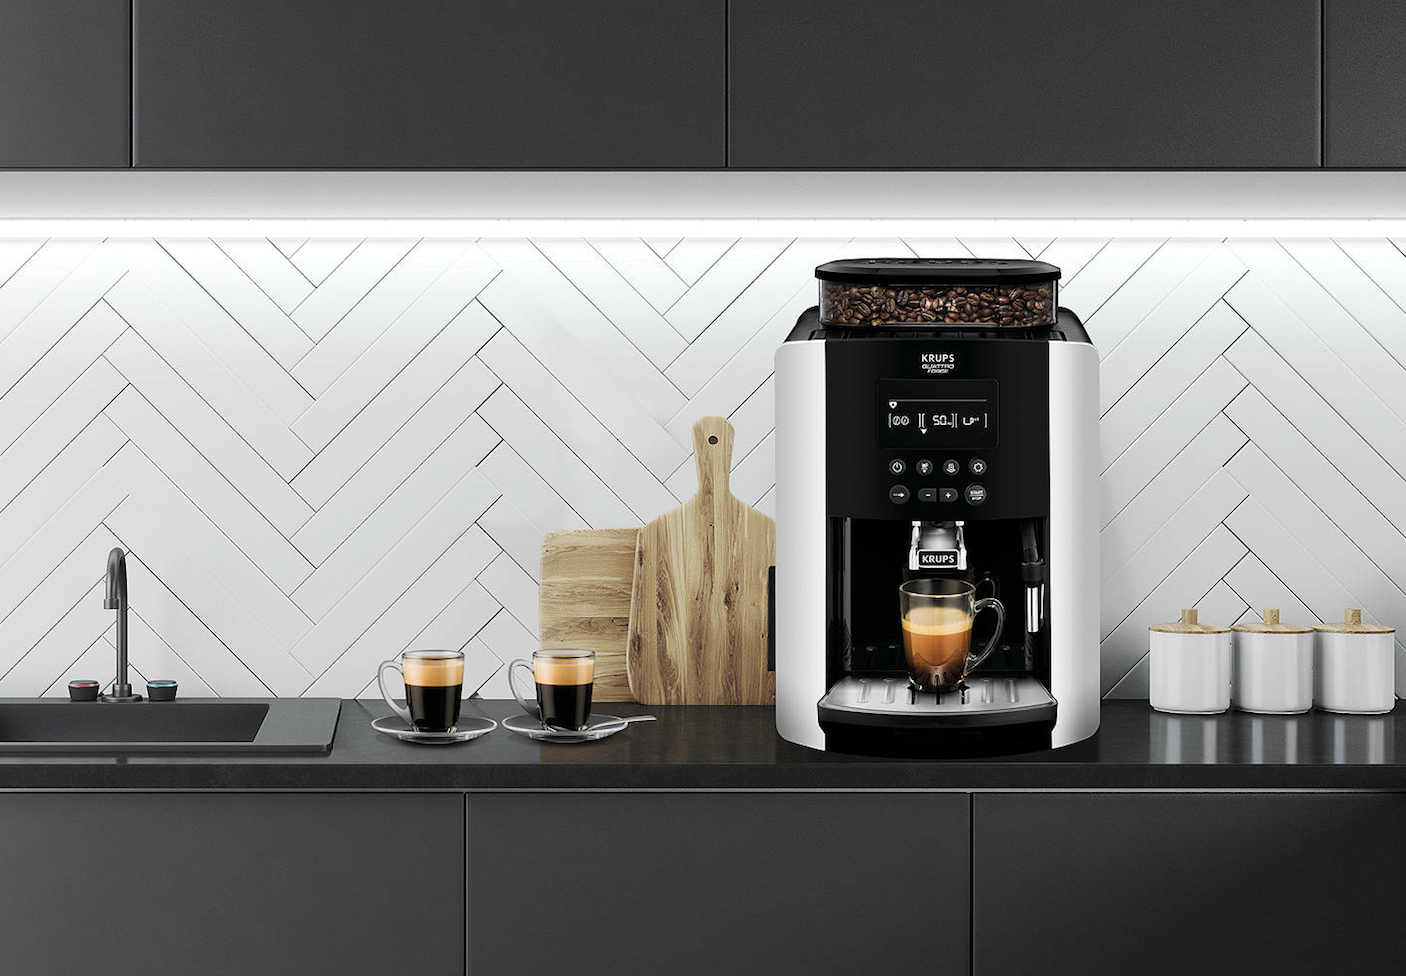 Single-serve or bean-to-cup coffee machine: which is best?